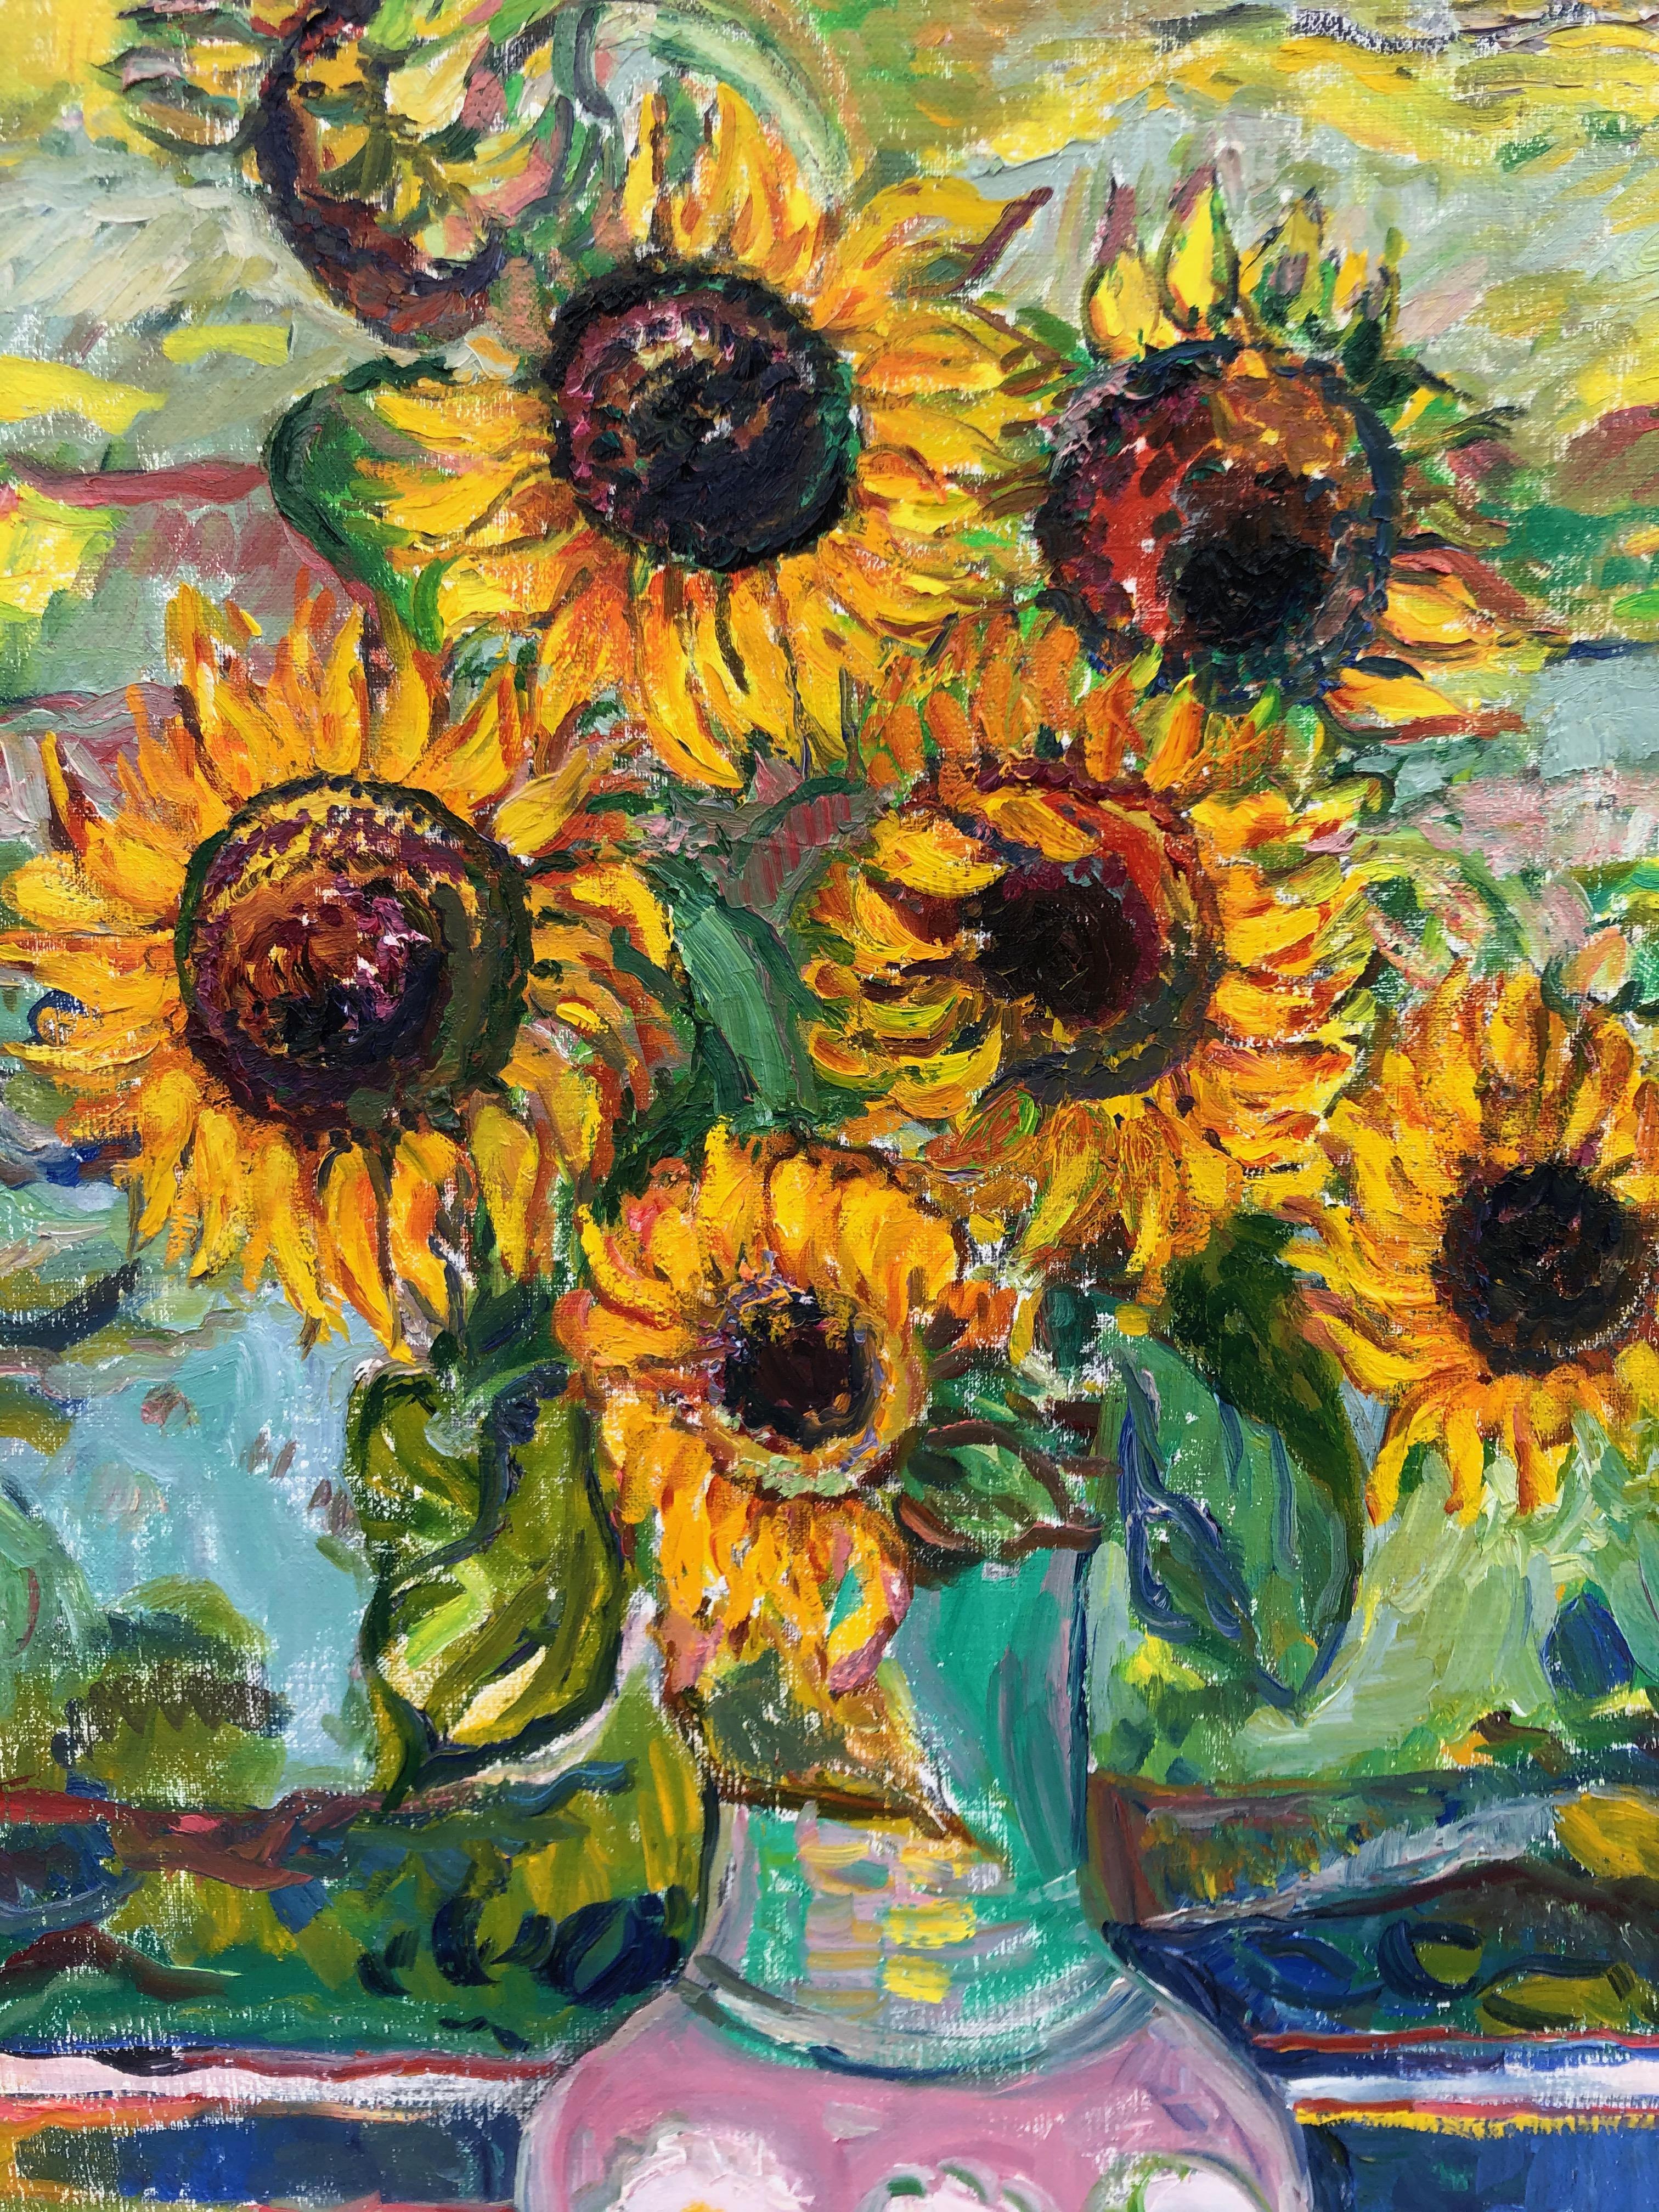  Sunflowers In The Landscape  - Painting by Jehudith Sobel